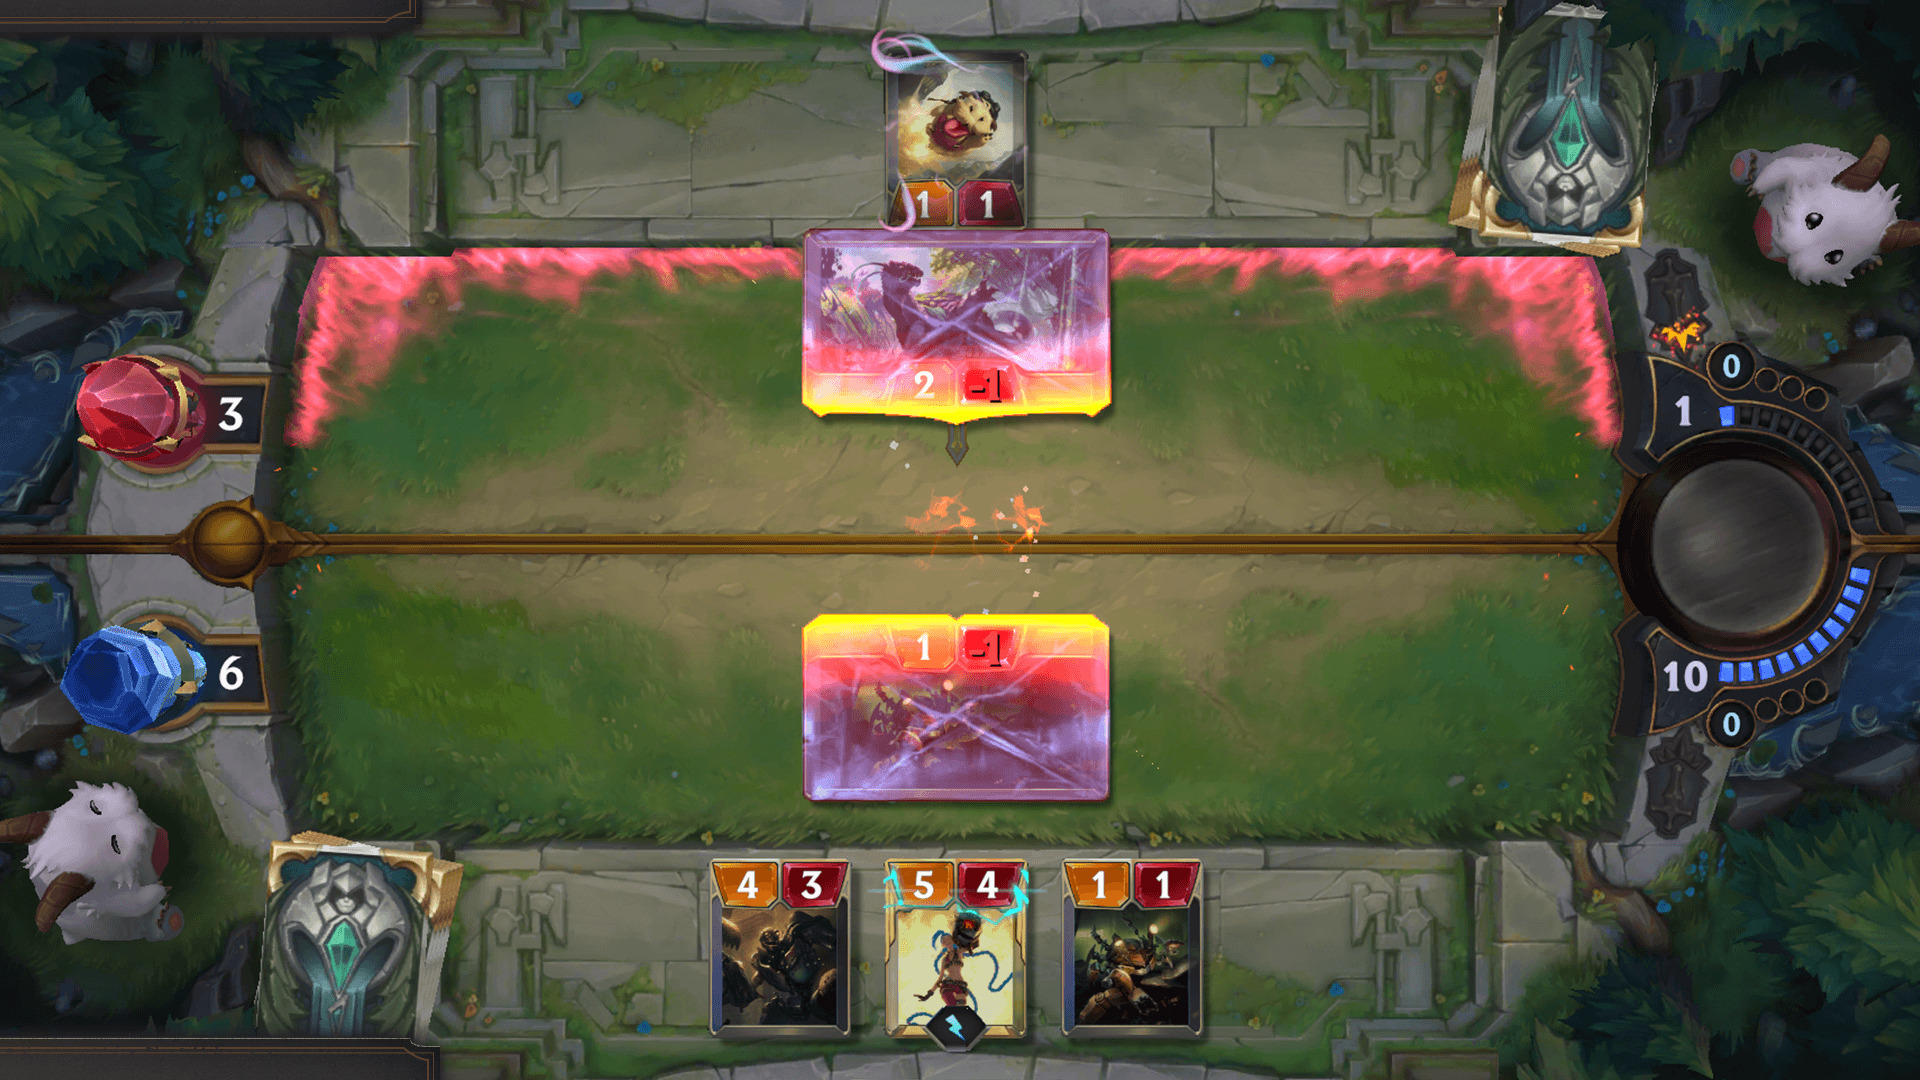 Legends of Runeterra on Android - Riot Game’s Awesome Card Game is Coming to BlueStacks Soon!